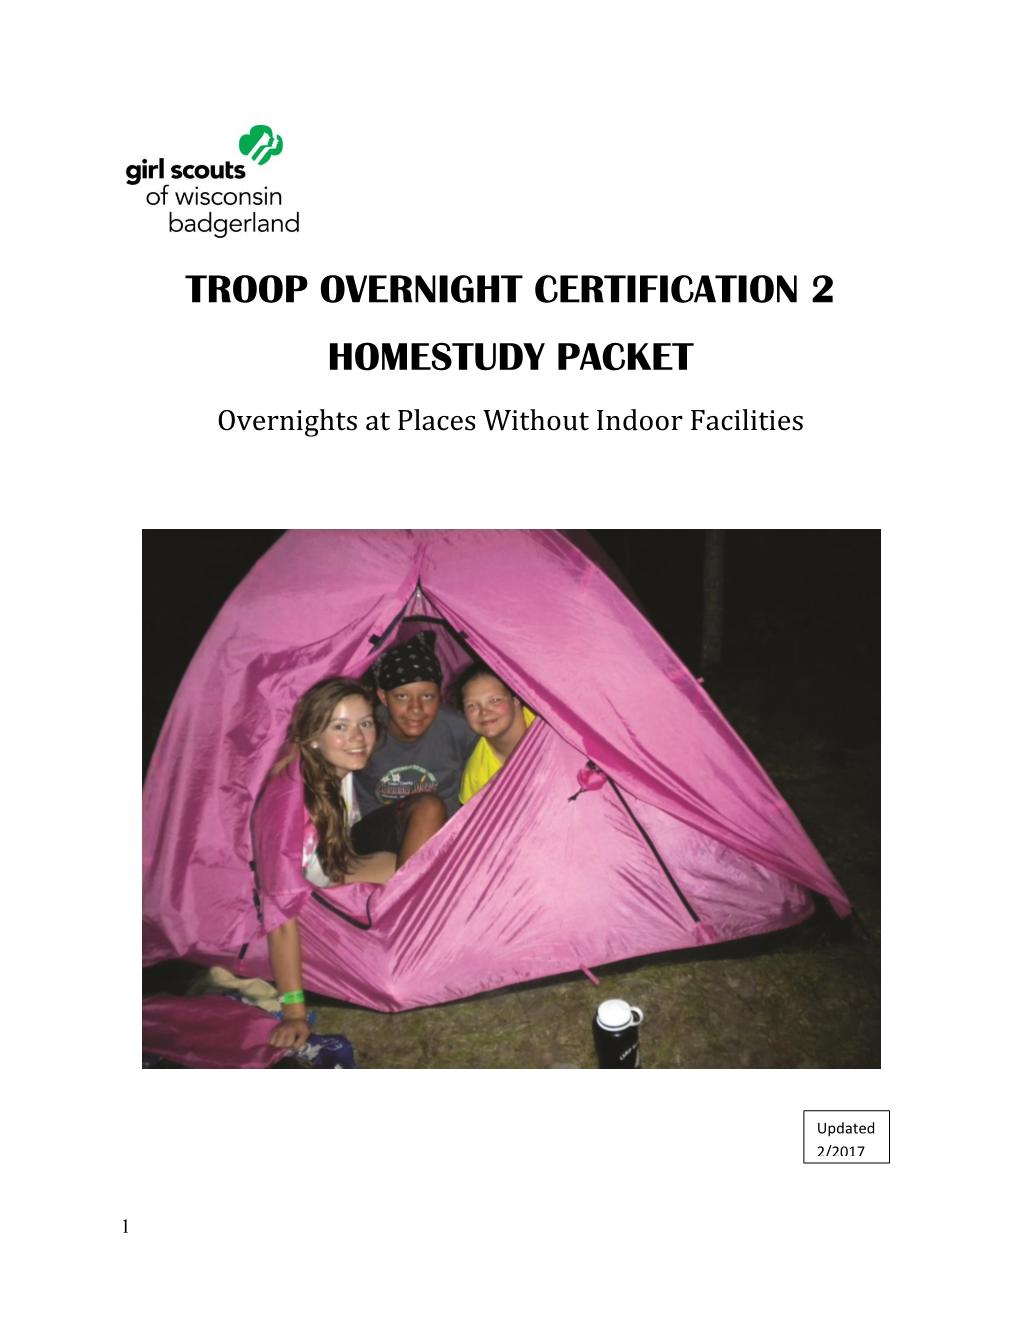 Troop Overnight Certification 2 Homestudy Packet